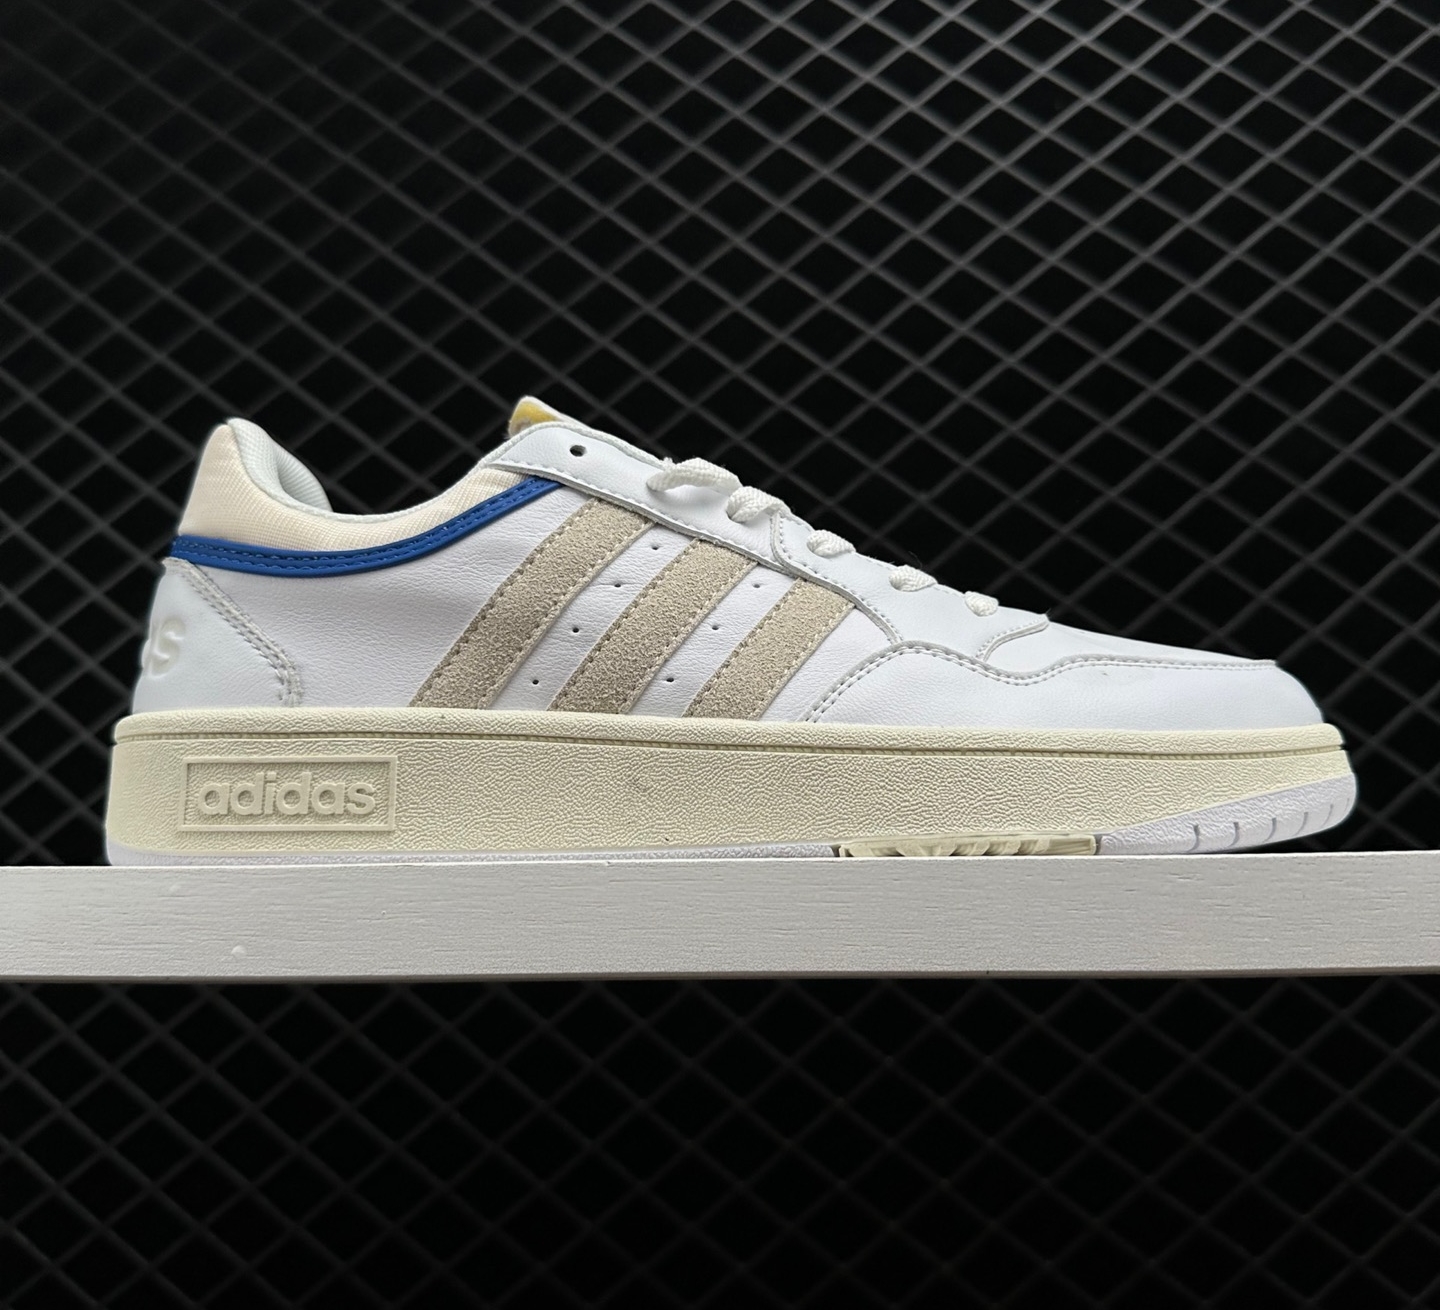 Adidas Neo Hoops 3.0 White Blue GZ1346 - Stylish and Versatile Footwear